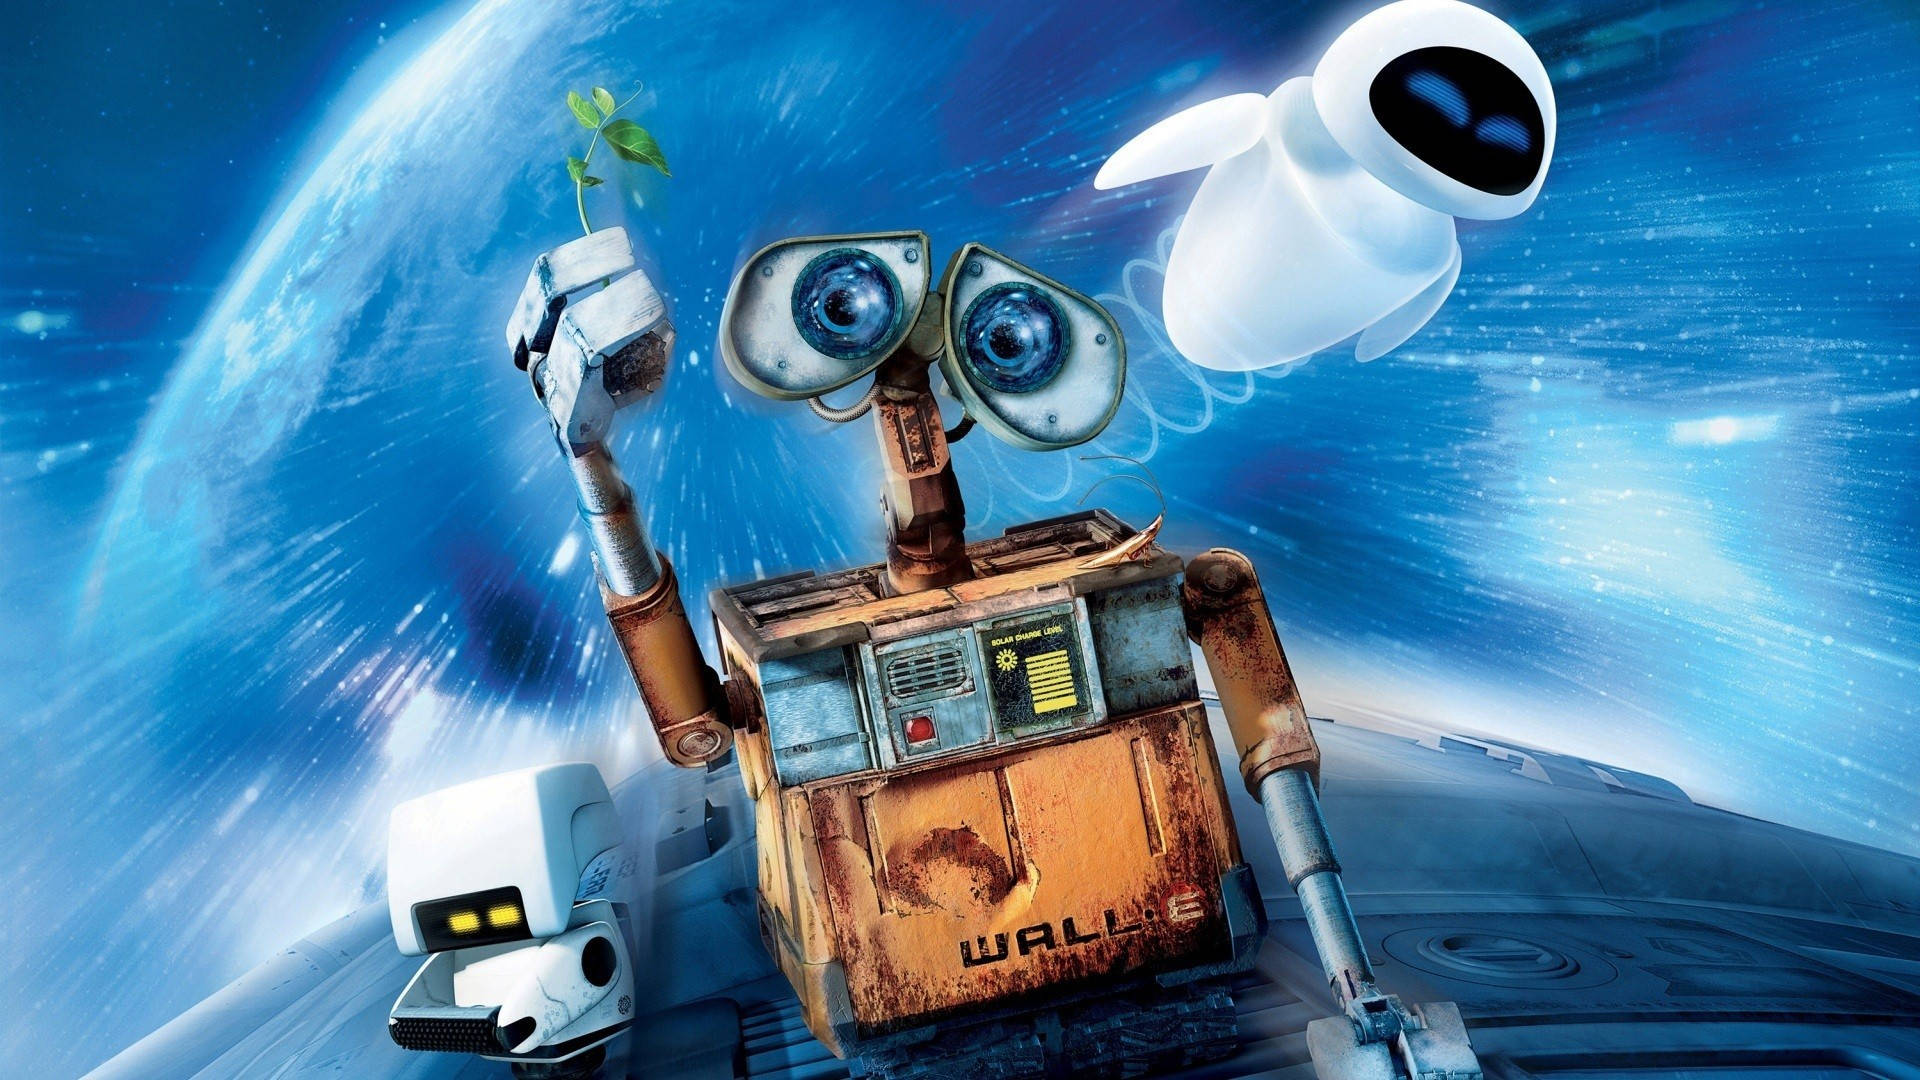 WALL E Seedling Discovery Wallpaper